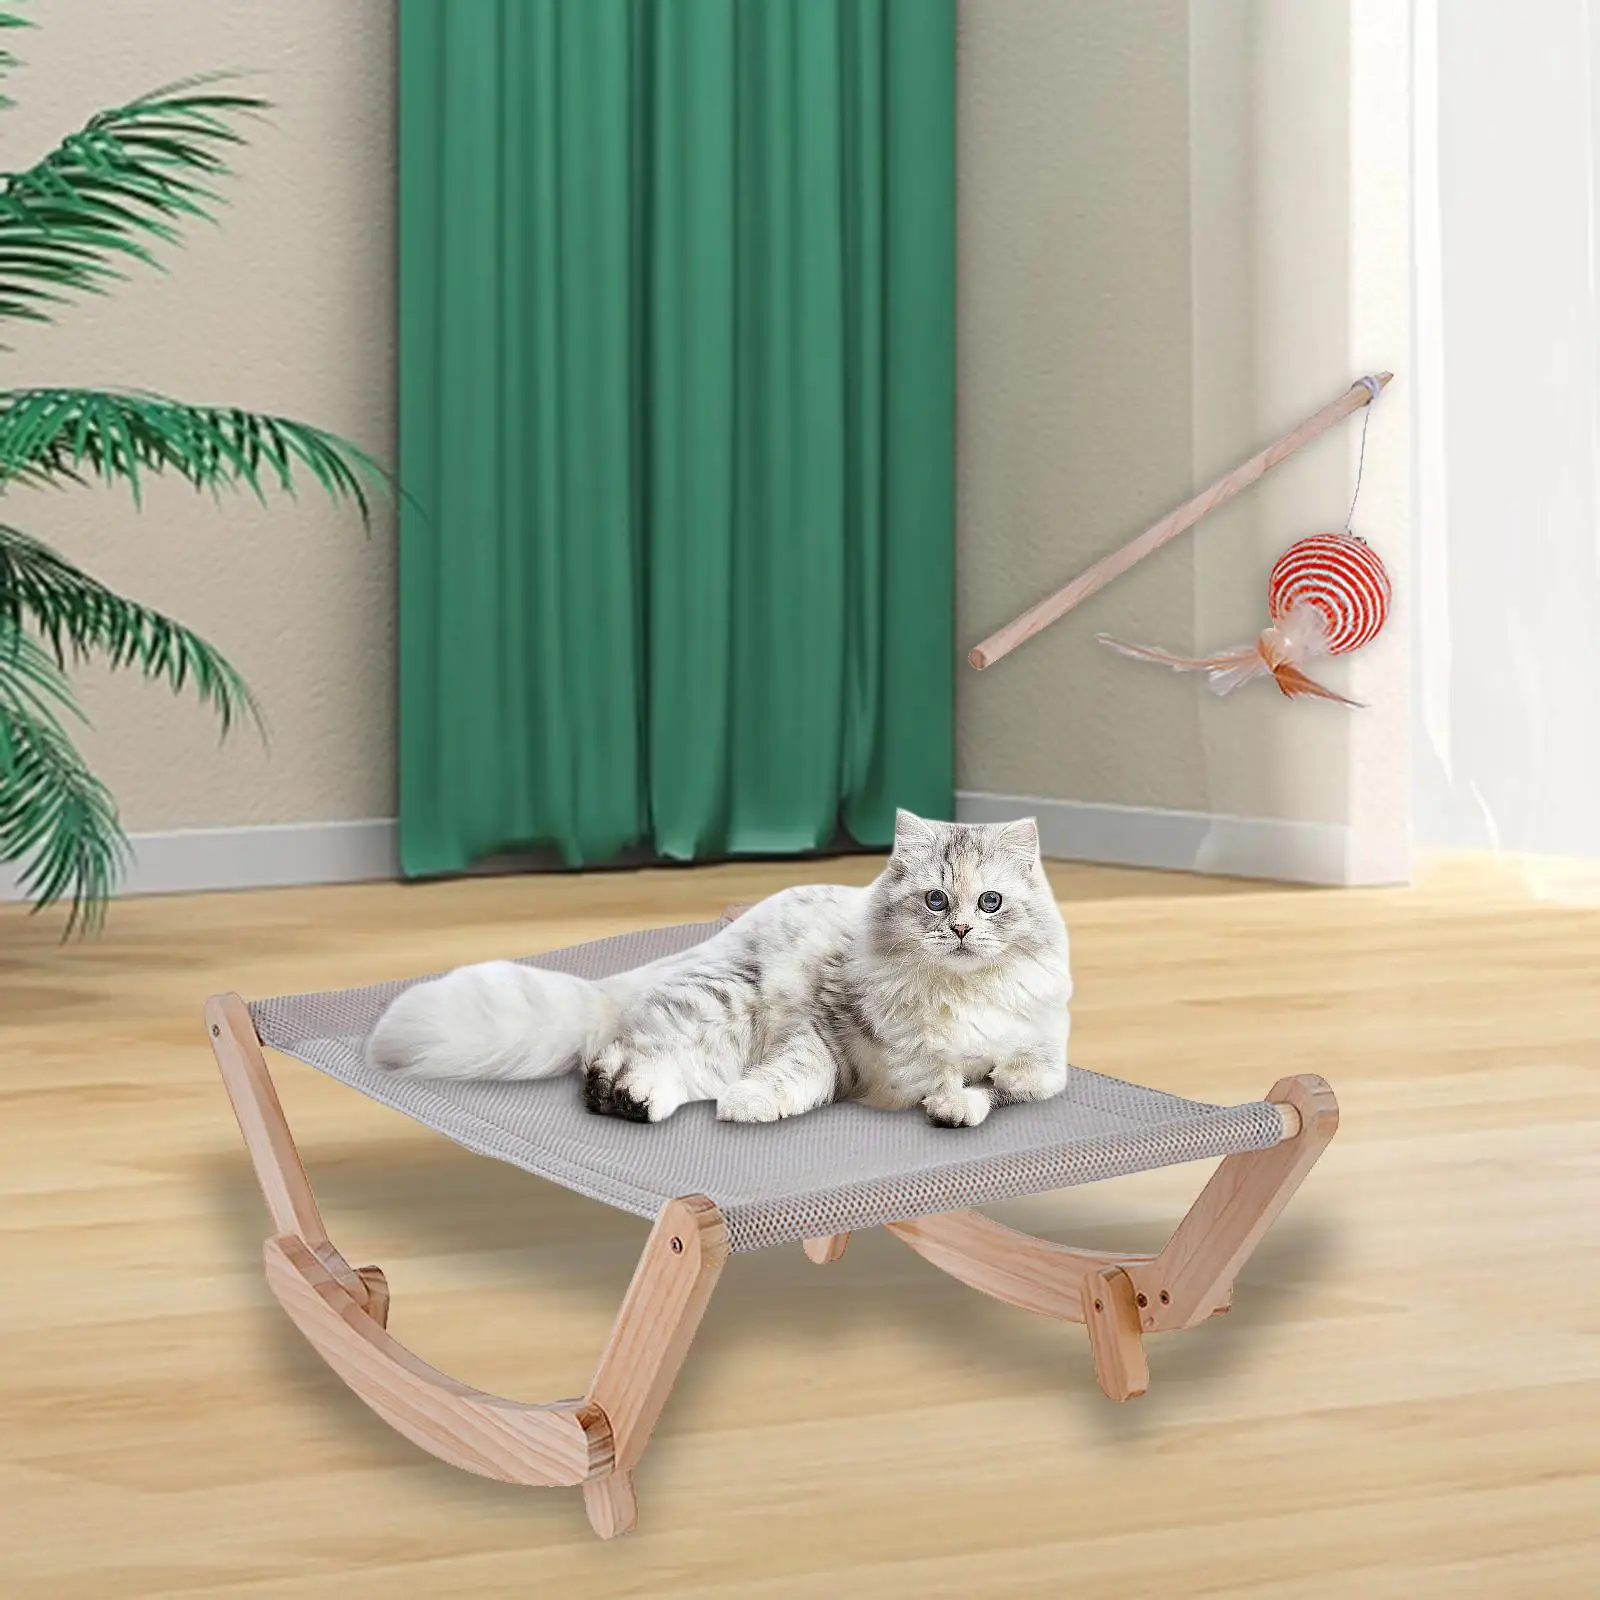 Cat Rocking Hammock Chair Pet Rocker Bed Chair for Kitty Small Dogs Cats